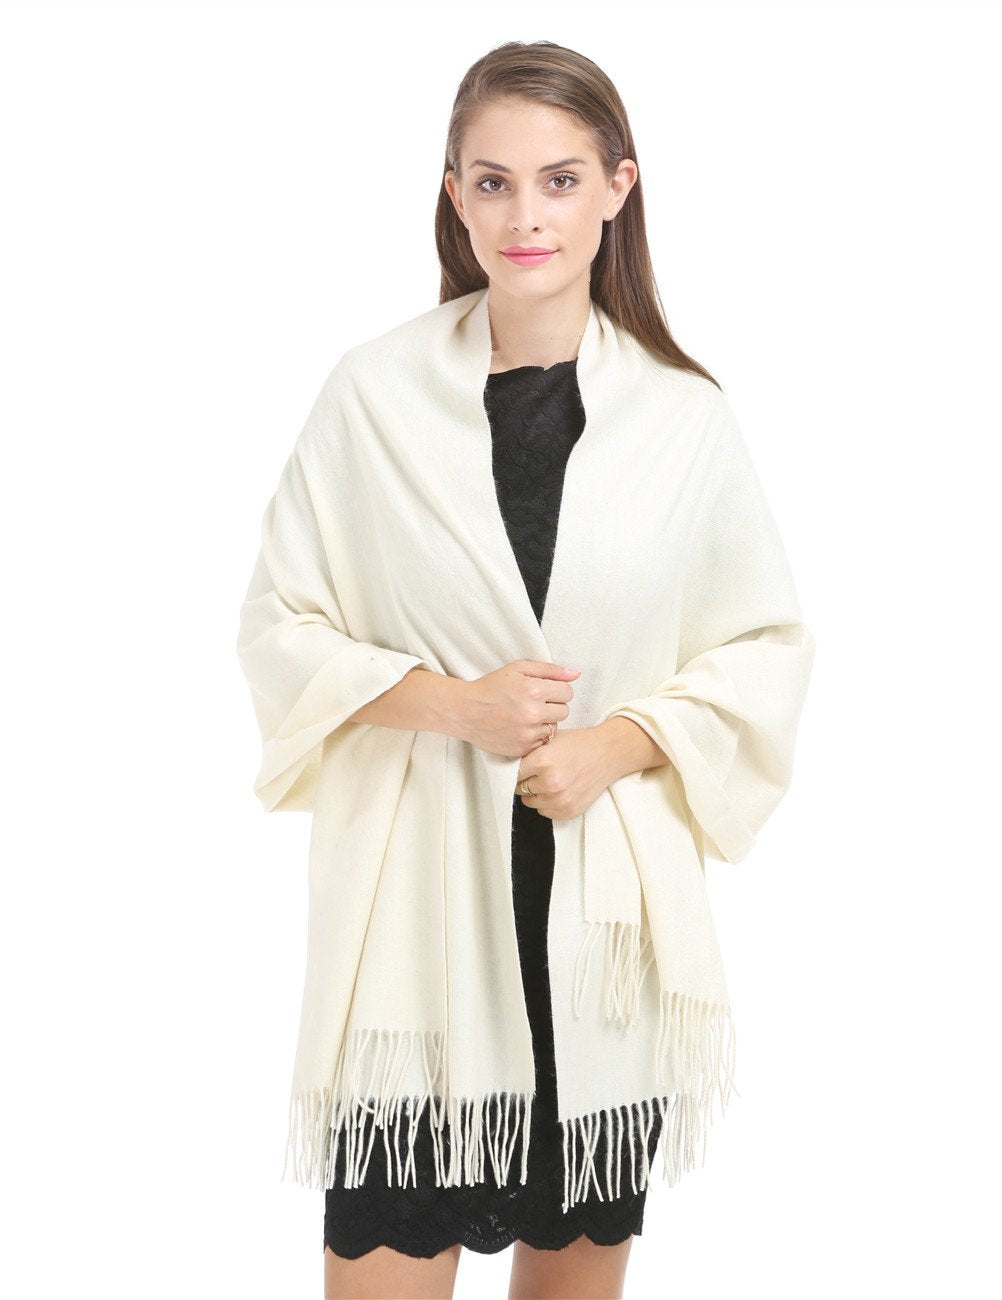 Cashmere Wraps Shawl Stole for Women Winter Warm and Soft Extra Large ...